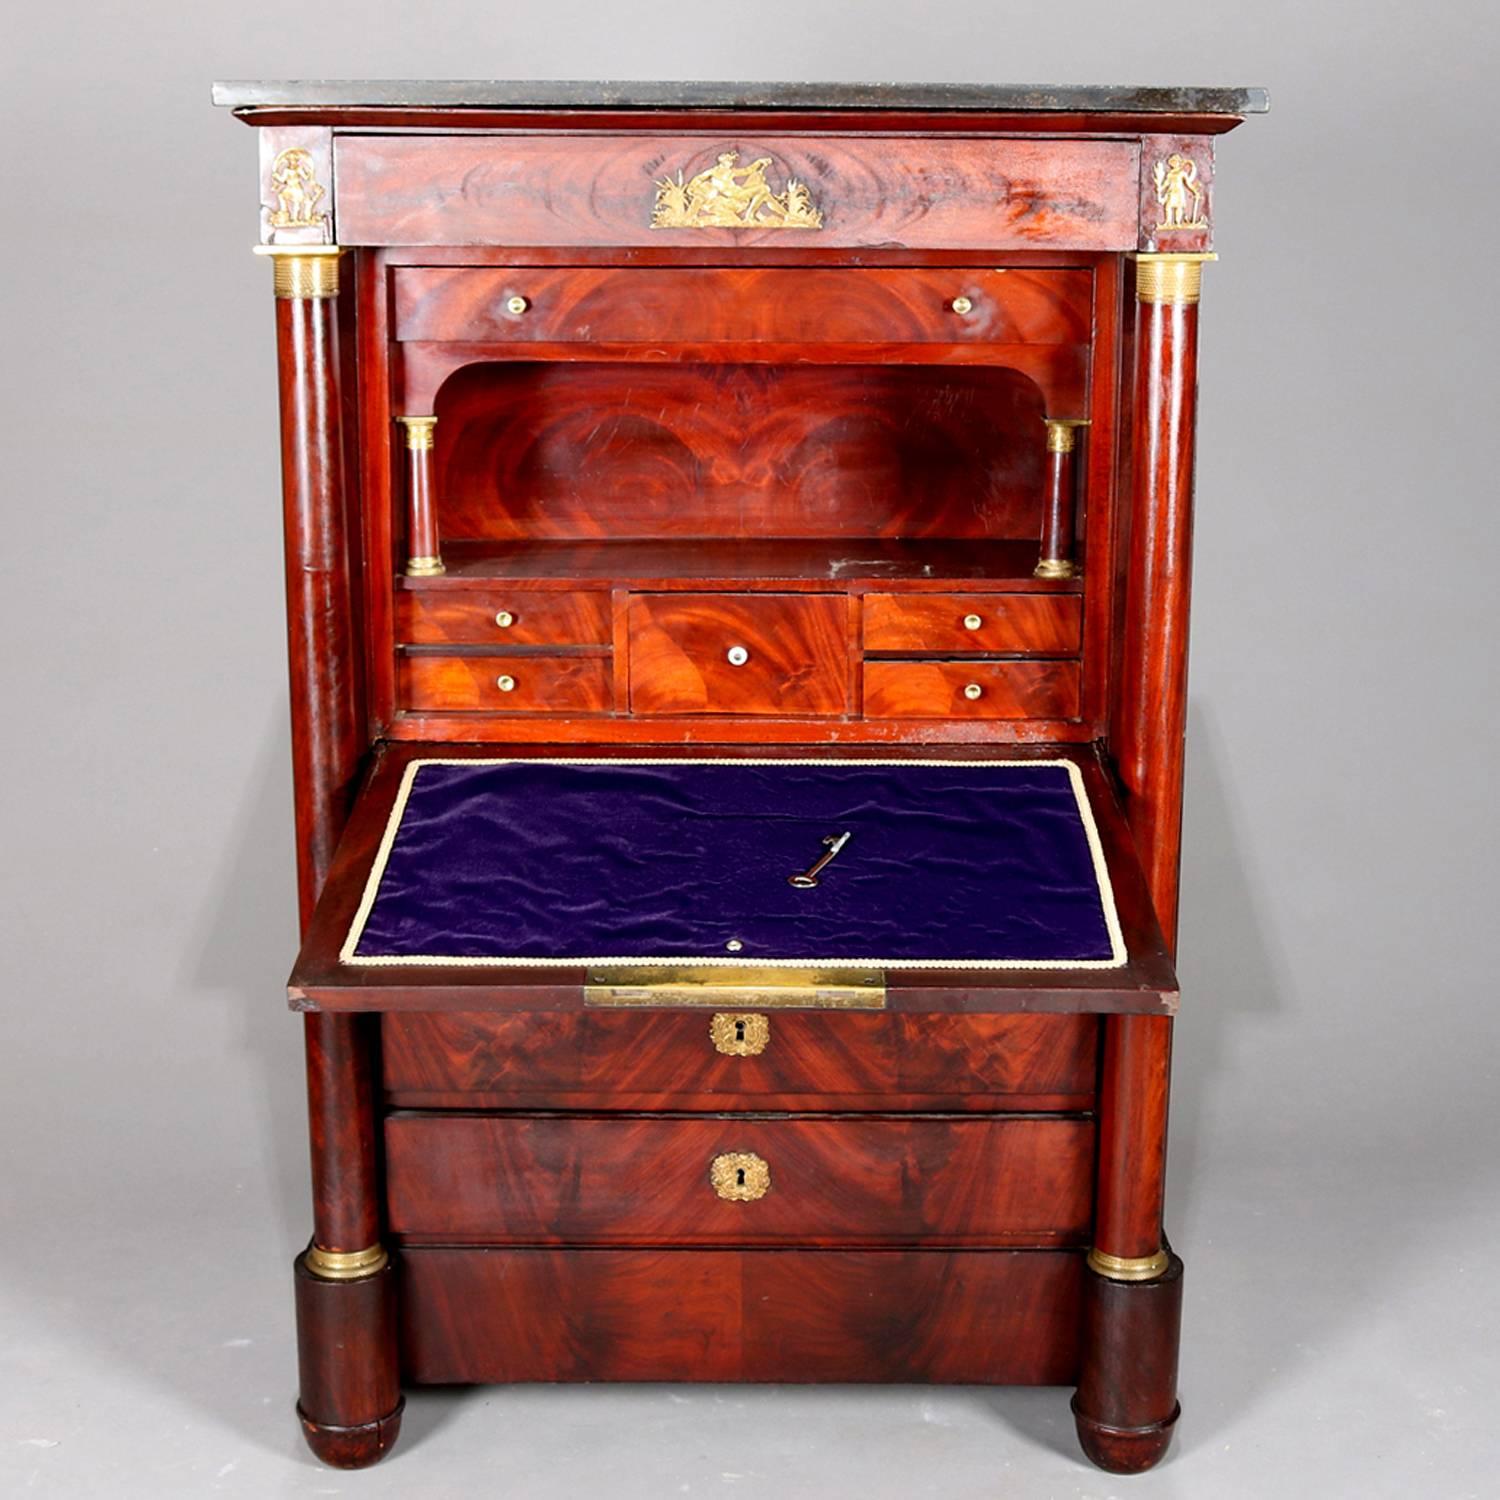 Antique Second Empire French Marble-Top Flame Mahogany and Ormolu Abattant 1